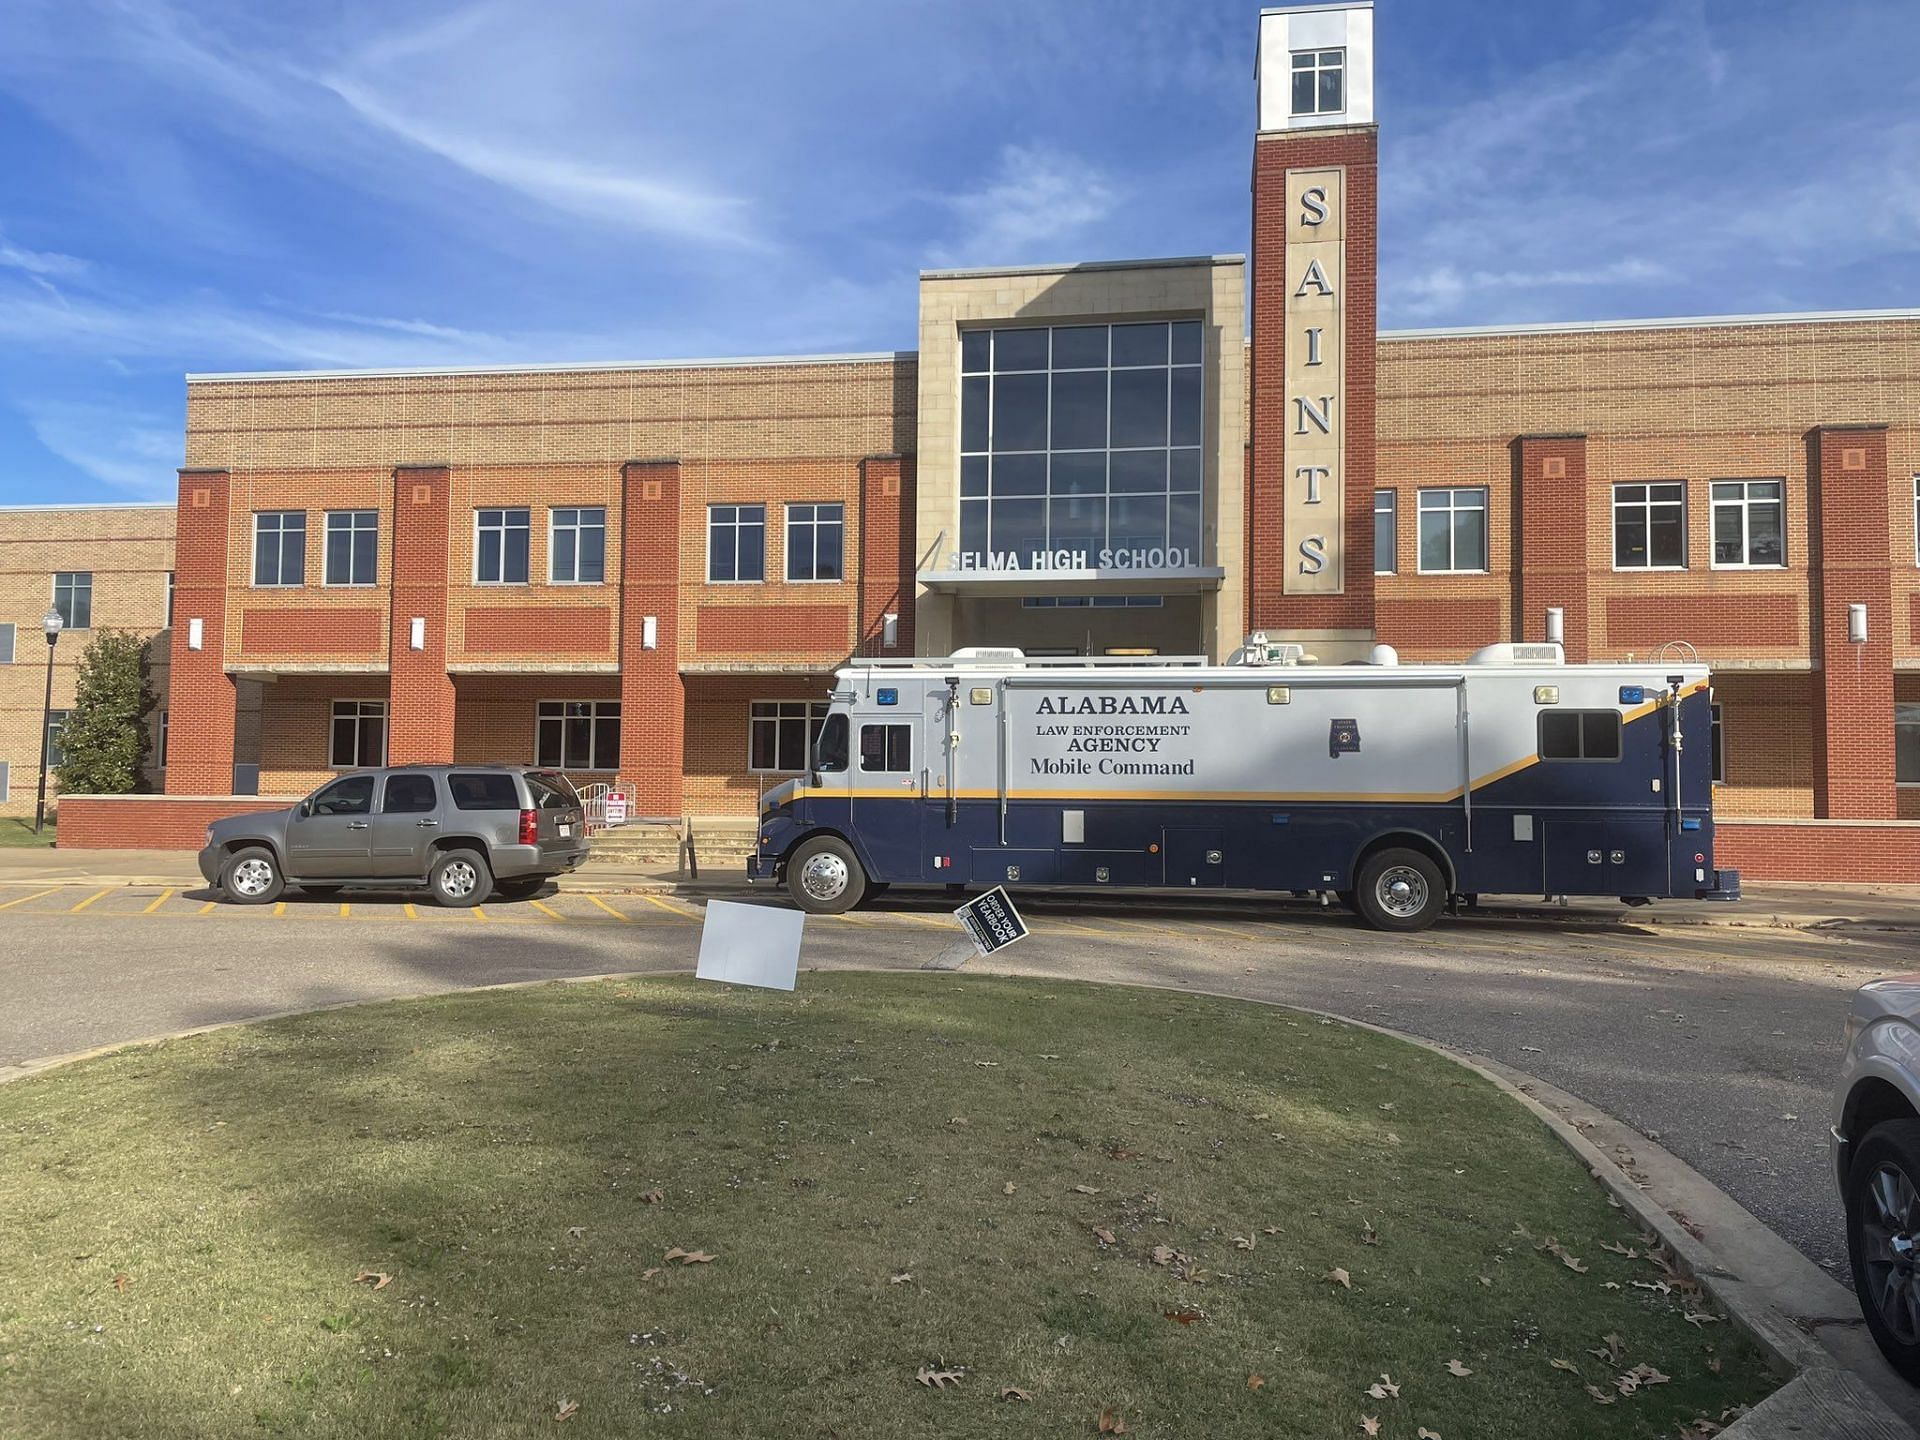 One dead, three more hospitalised after a sophomore year student was exposed to fentanyl during lunch hours. (Image via Selma High School)